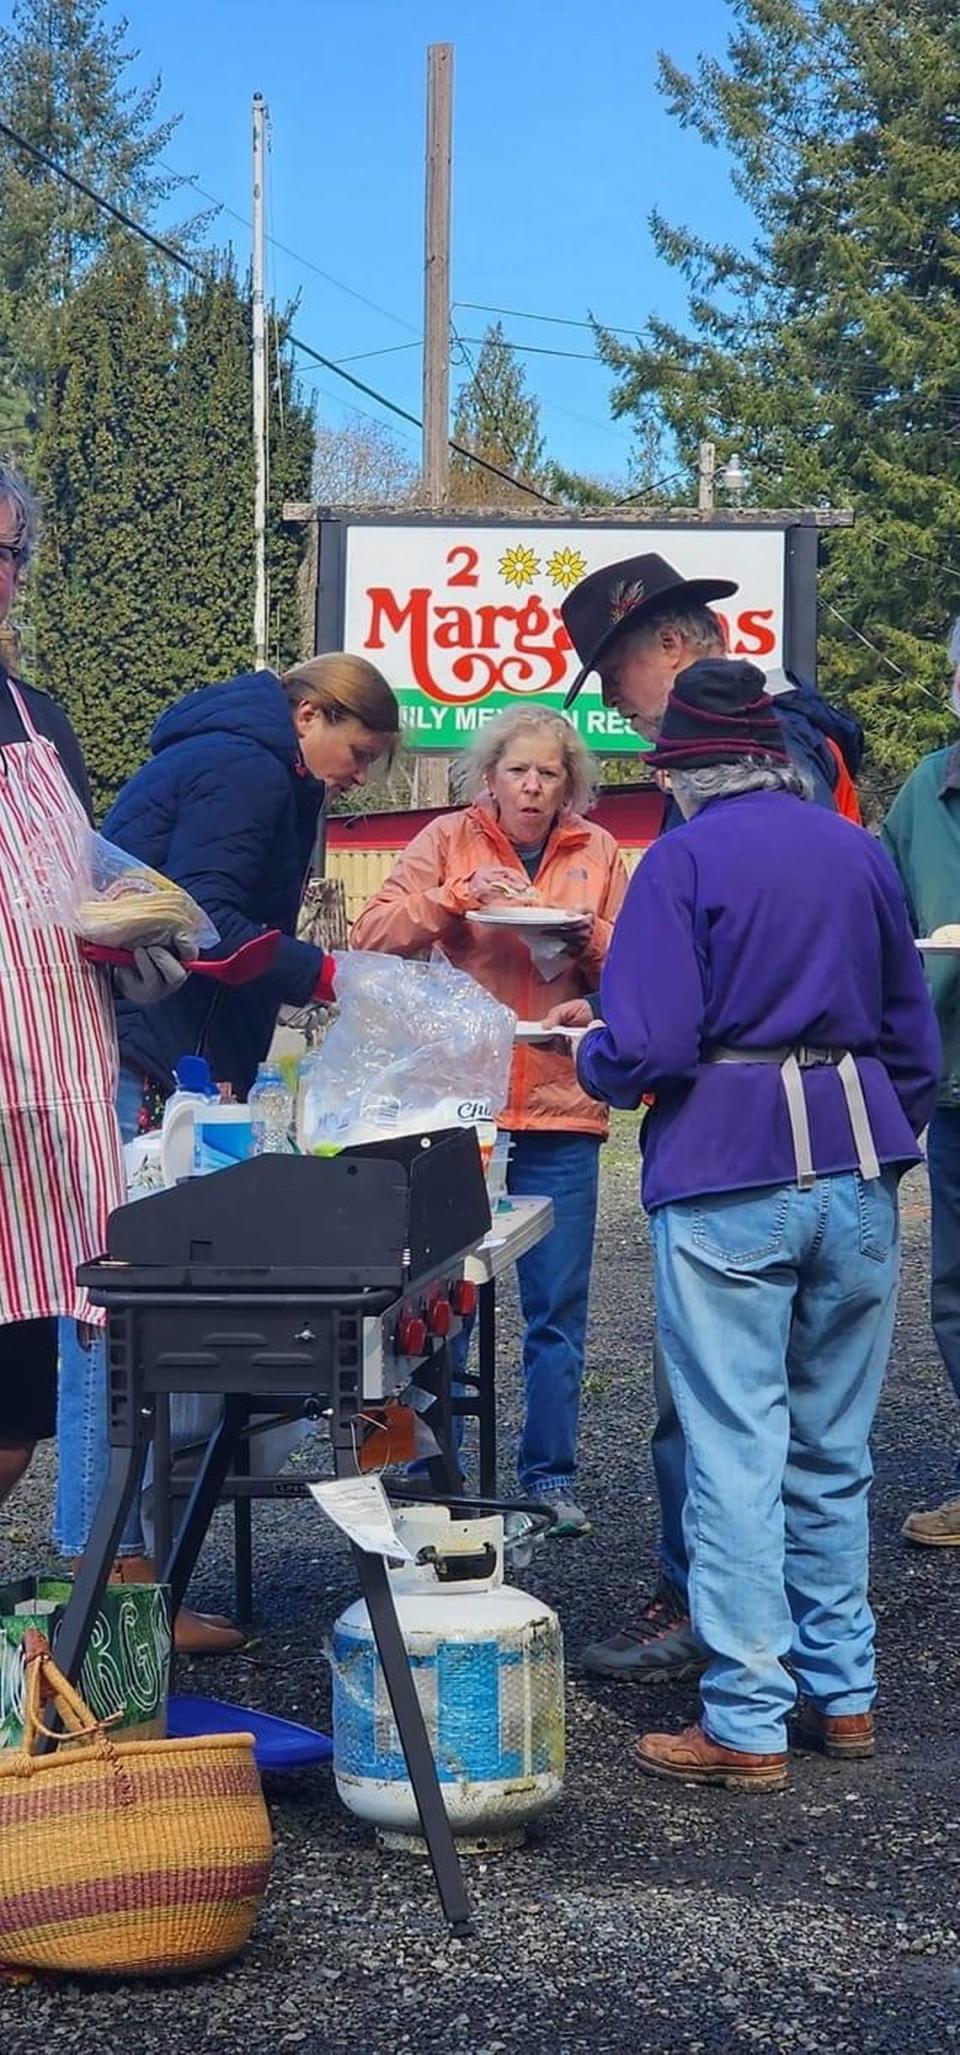 Key Peninsula residents line up for free tacos after an April fools prank said 2 Margaritas opened their doors.